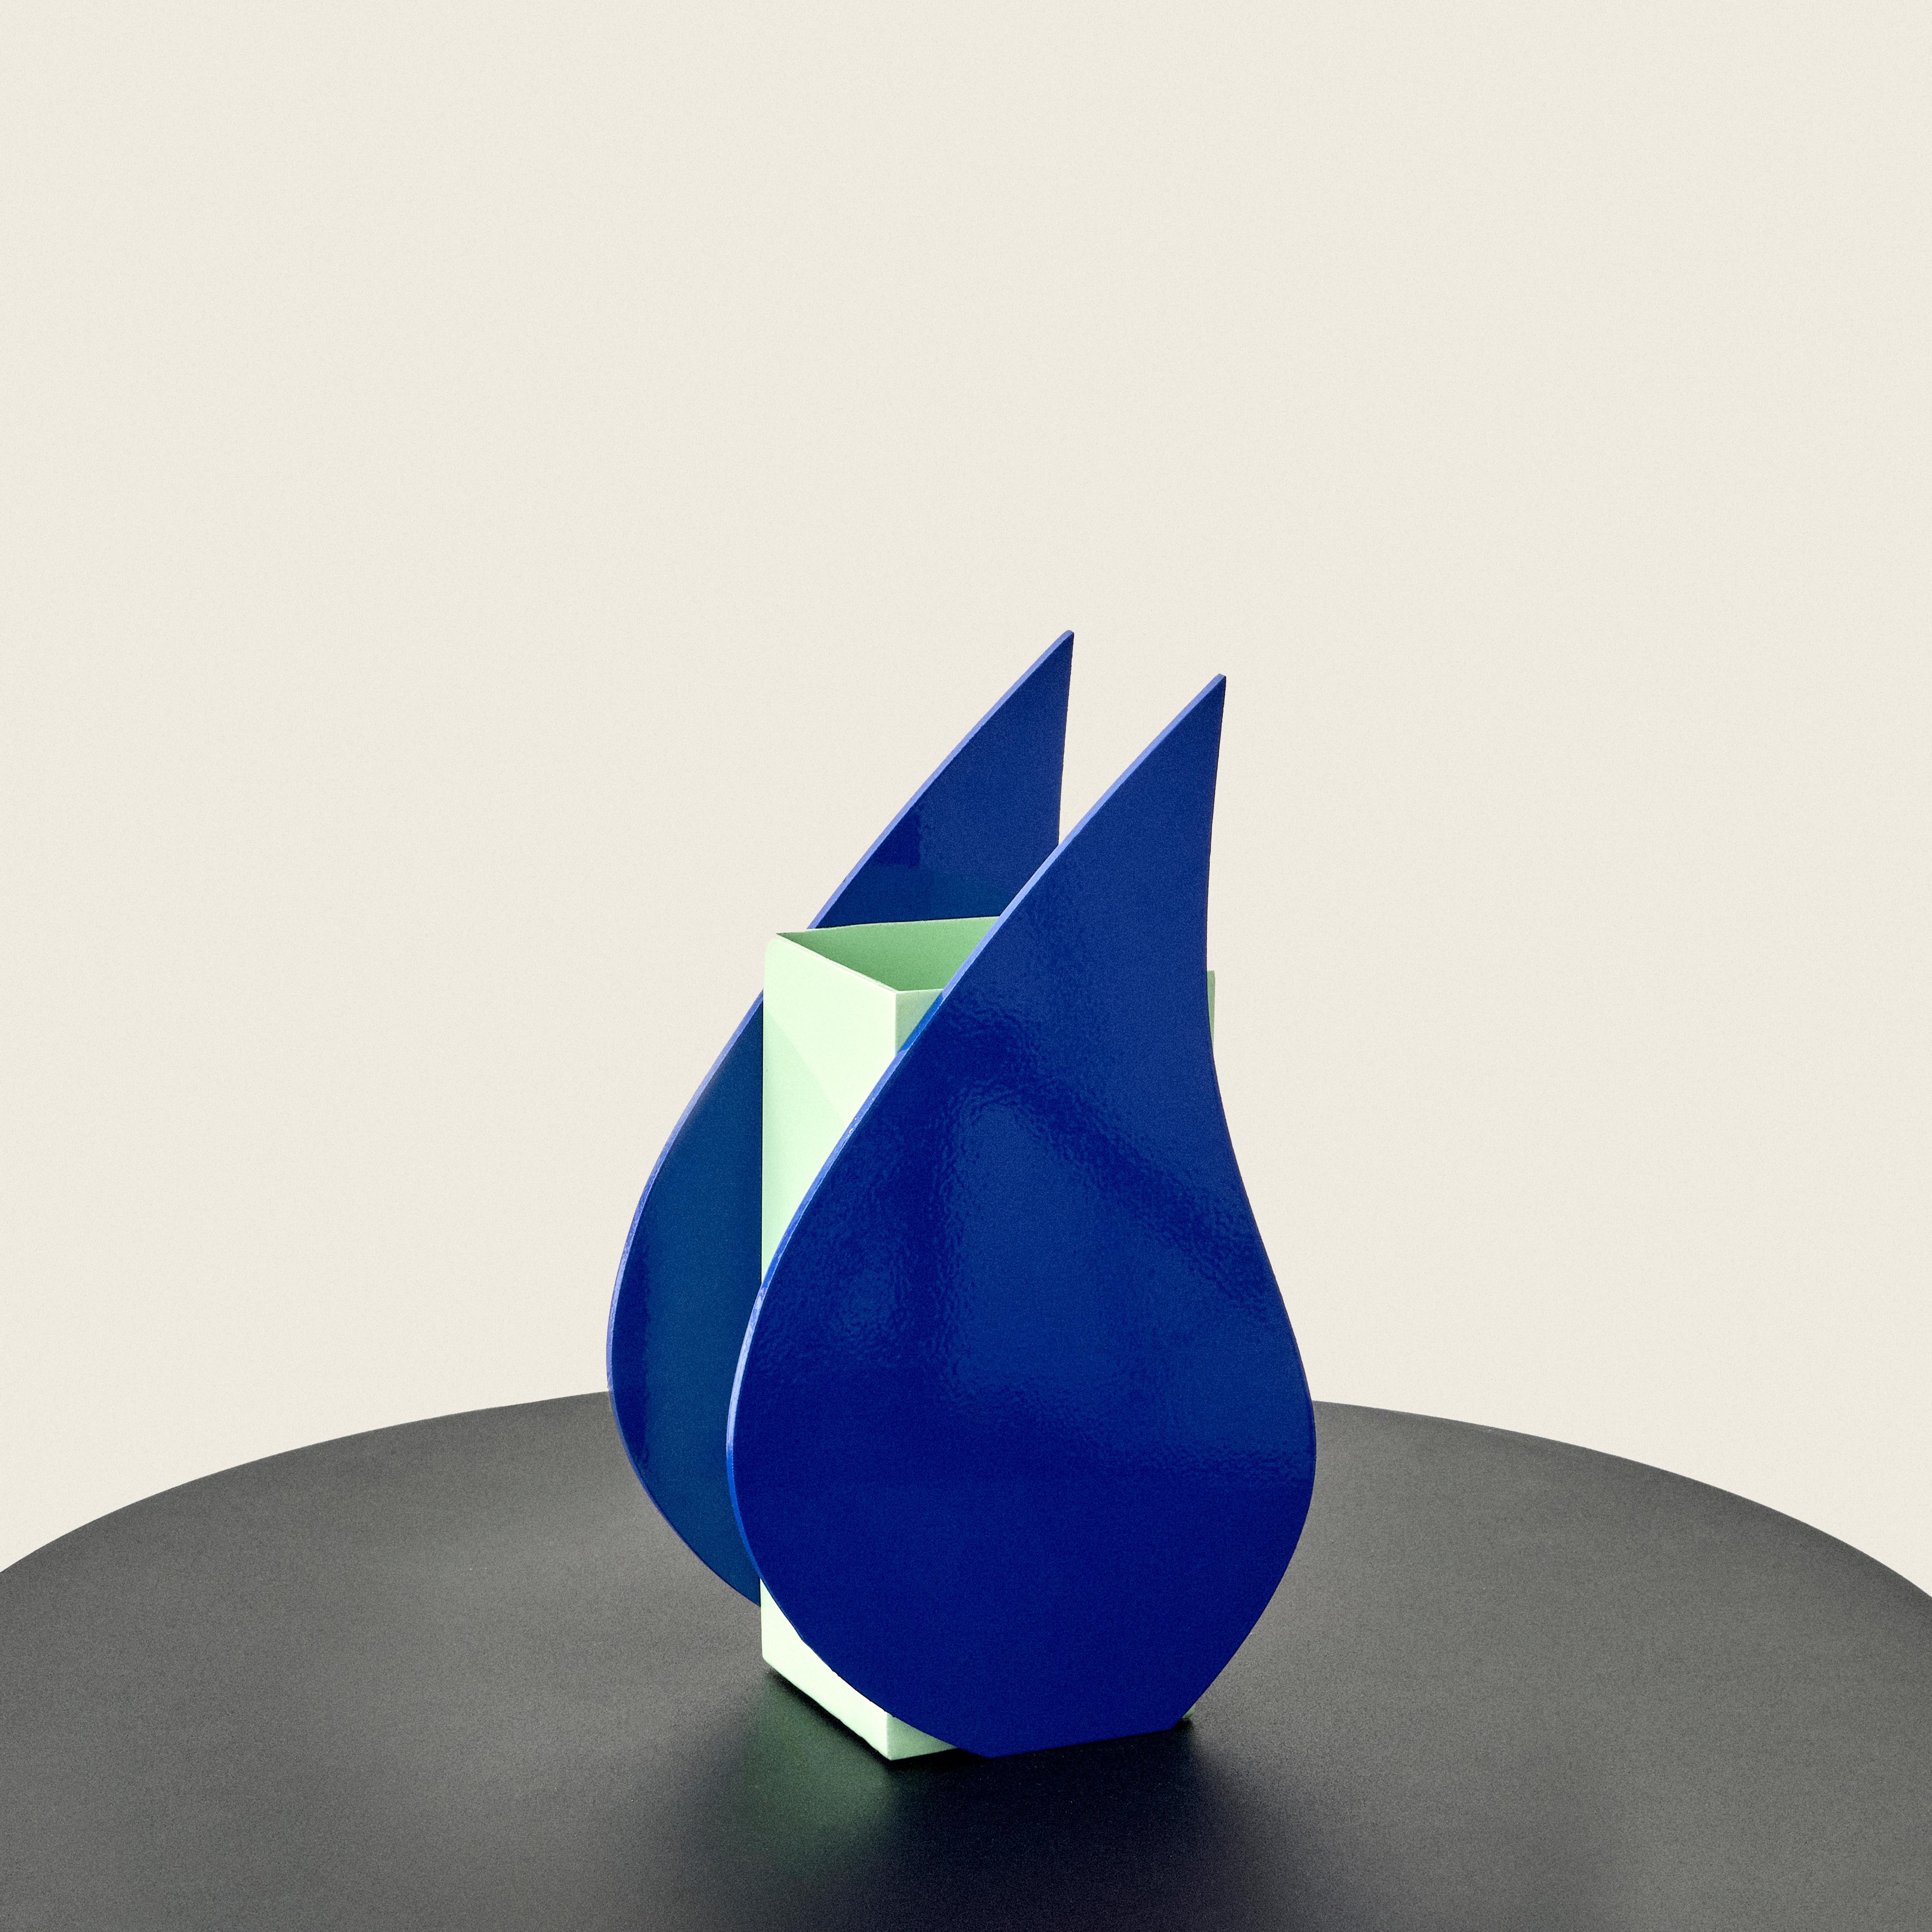 Animate Object's vase collection takes inspiration from the merging of abstract cut-out shapes and forms to create unique decorative pieces. The Ocean Vase takes cues from the beauty of the sea. Its shape, resembling a frozen droplet of water, adds